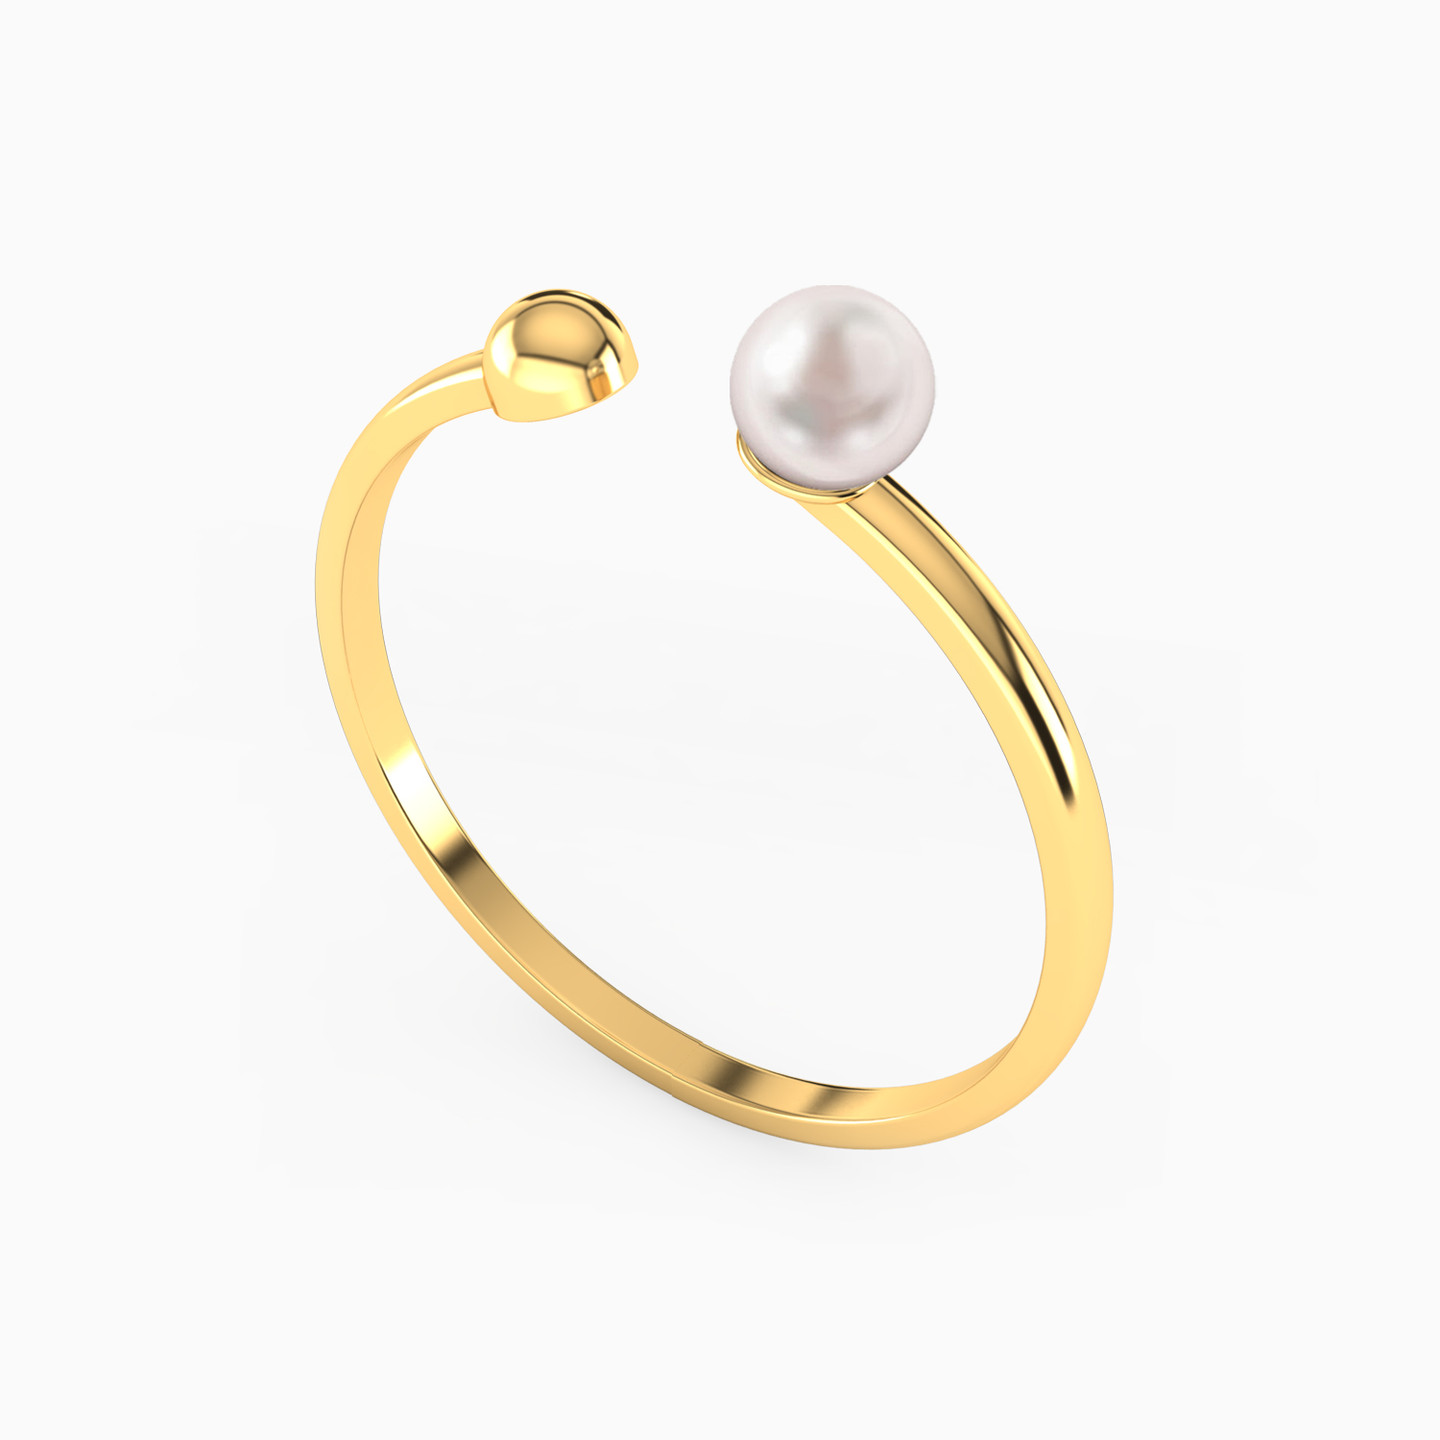 14K Gold Pearls Two-headed Ring - 2